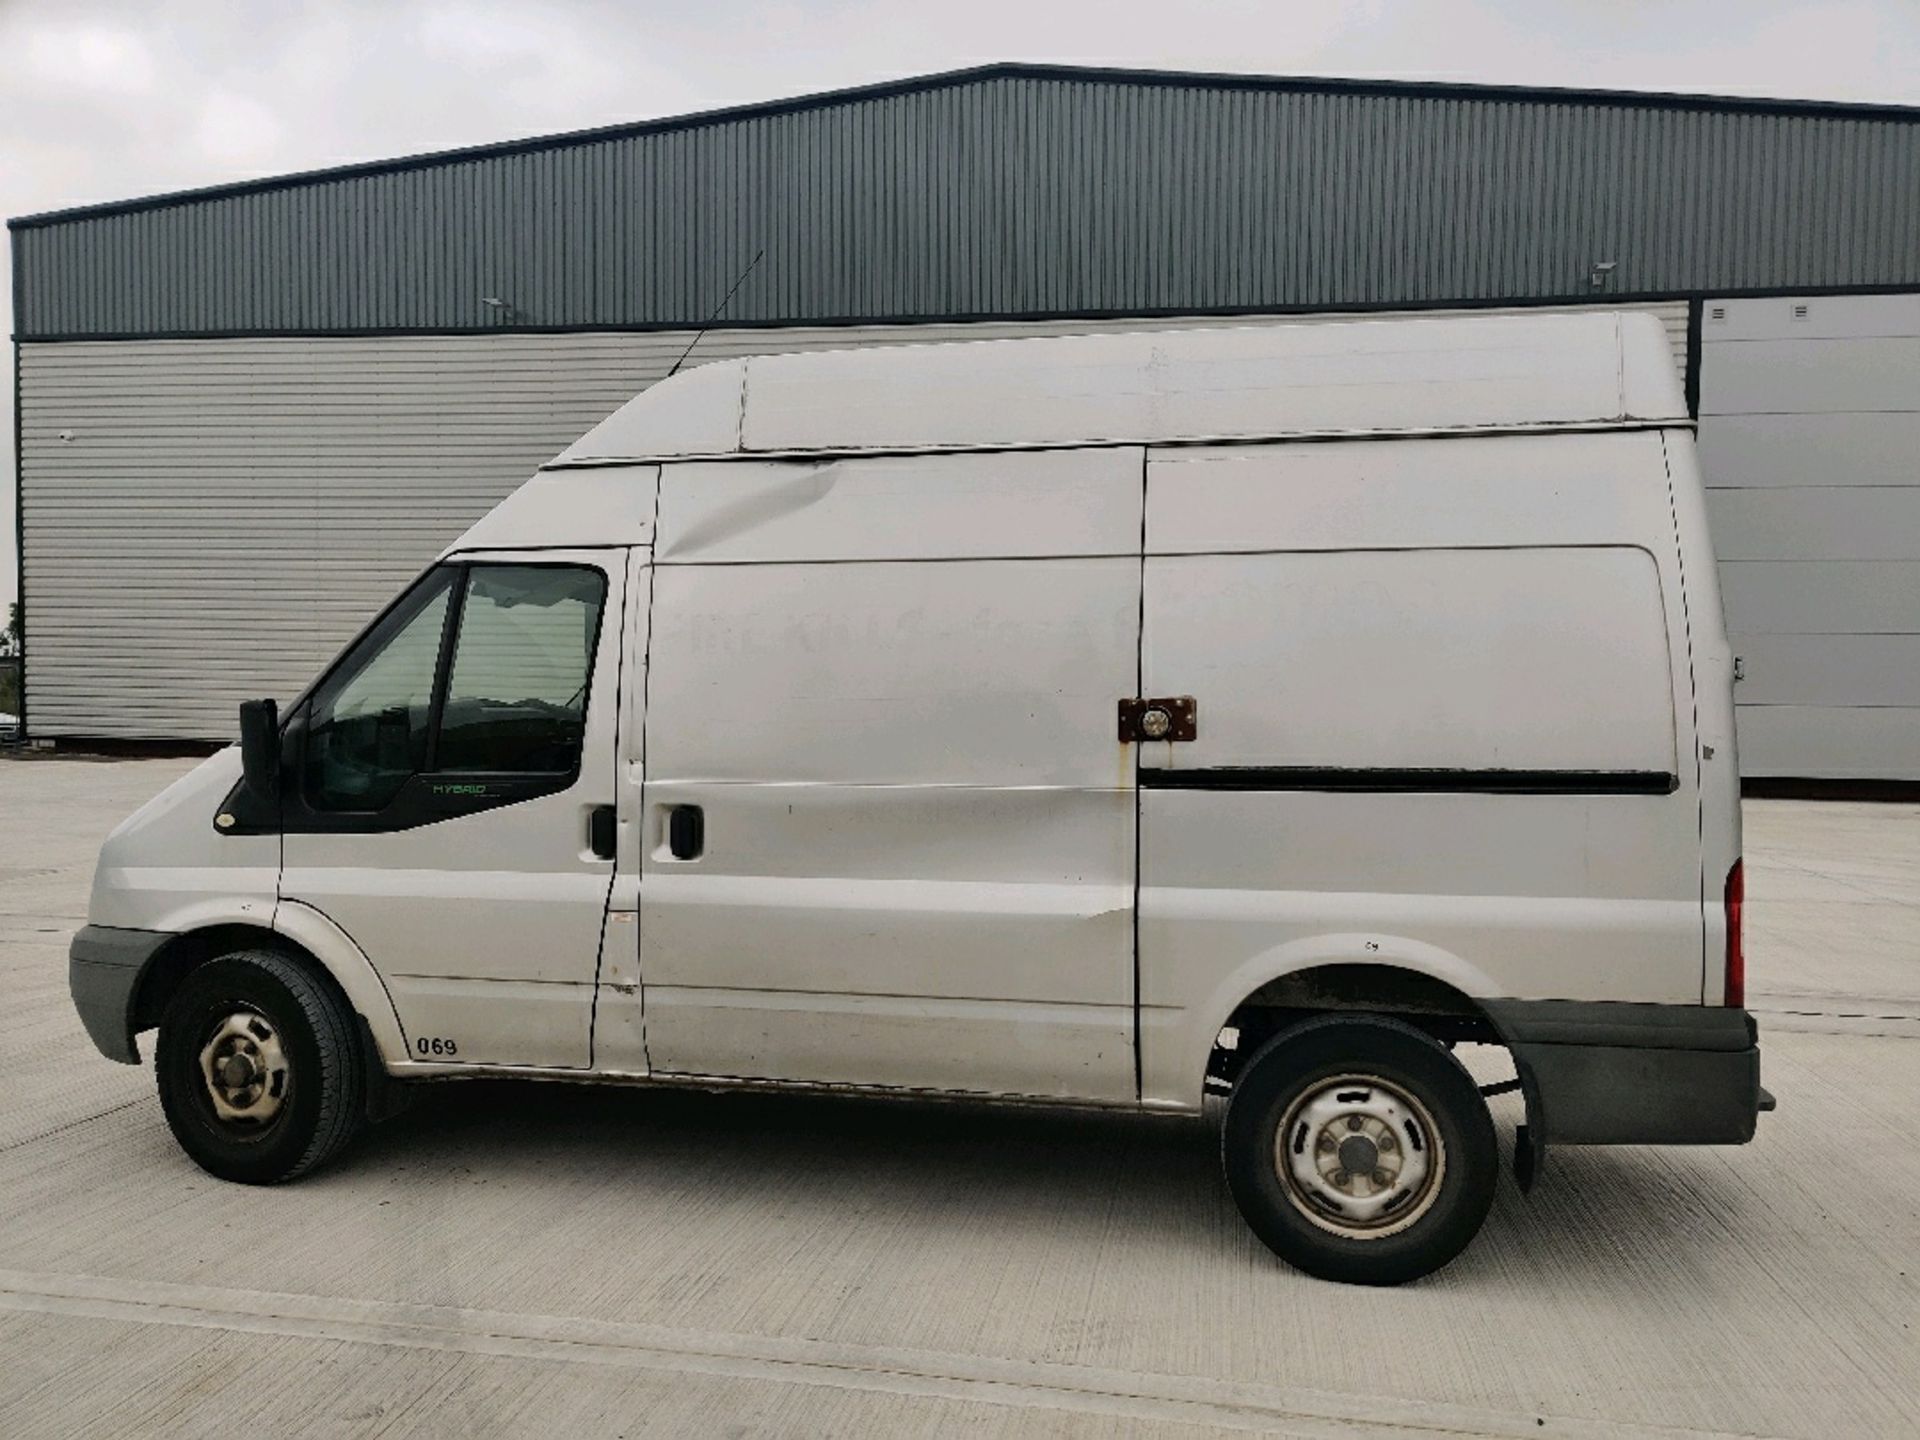 ENTRY DIRECT FROM LOCAL AUTHORITY Ford transit YK60UJD - Image 4 of 20